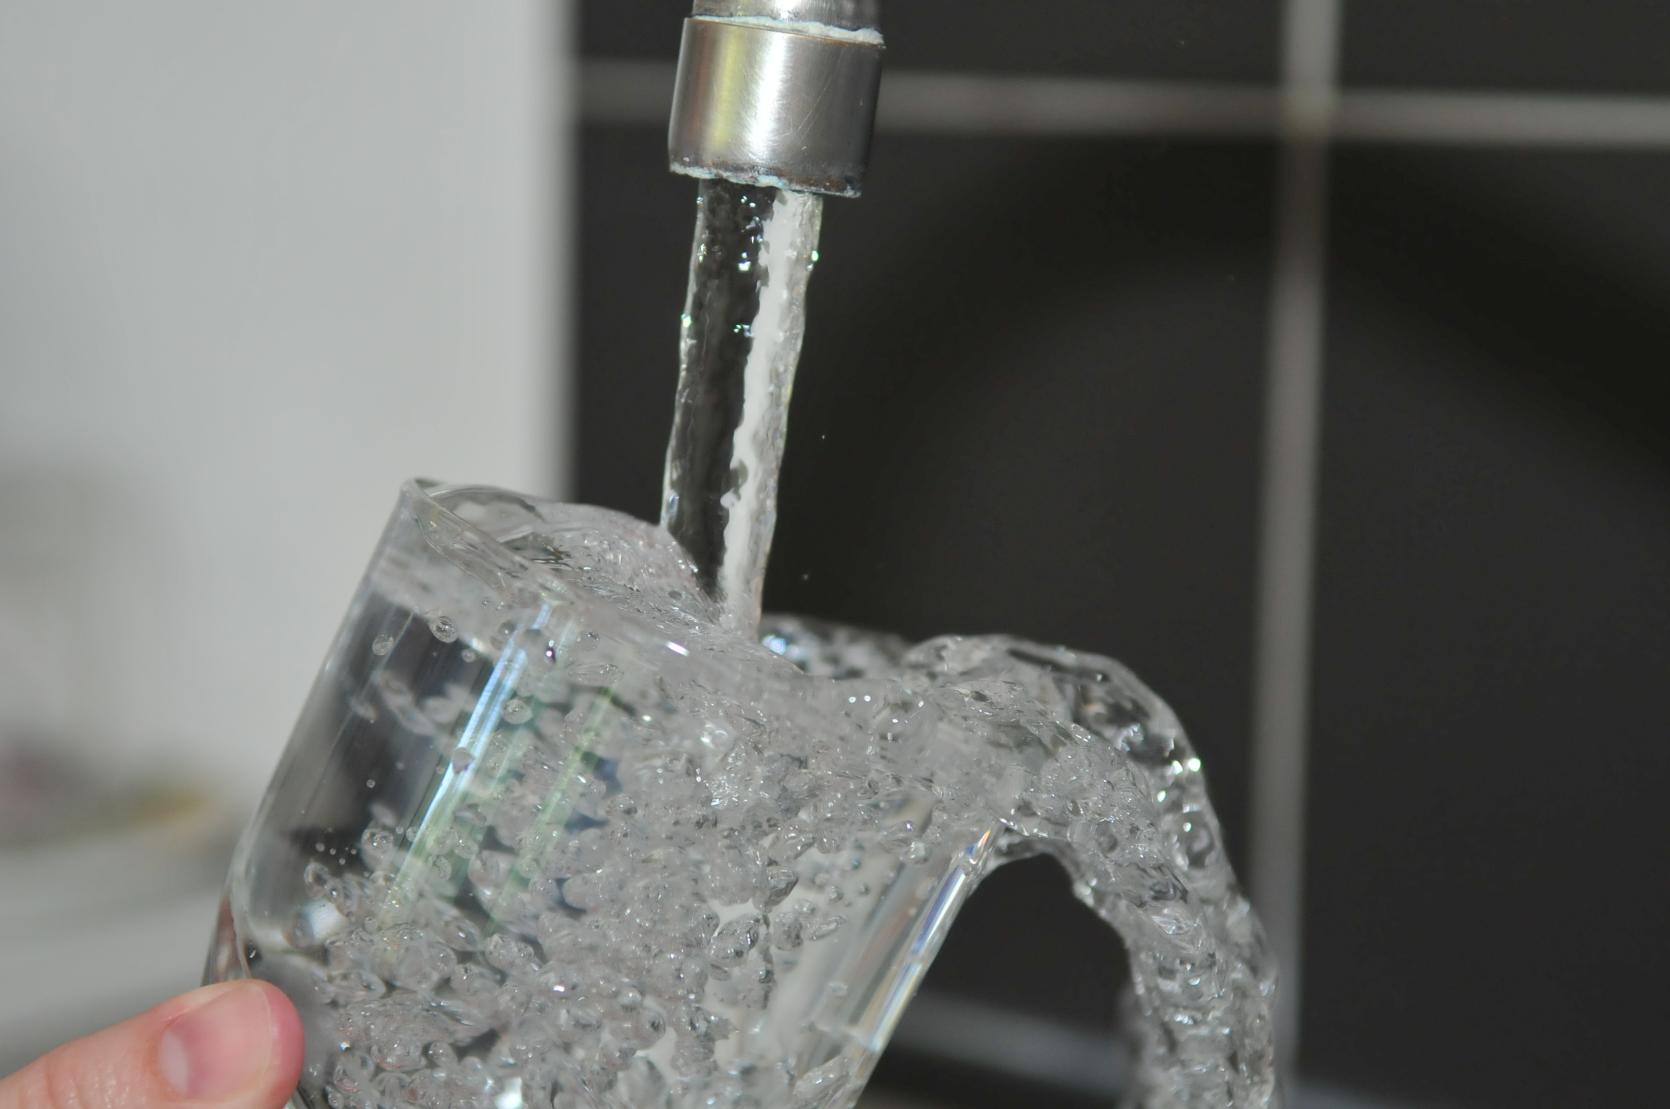 A glass being filled with water by a faucet.